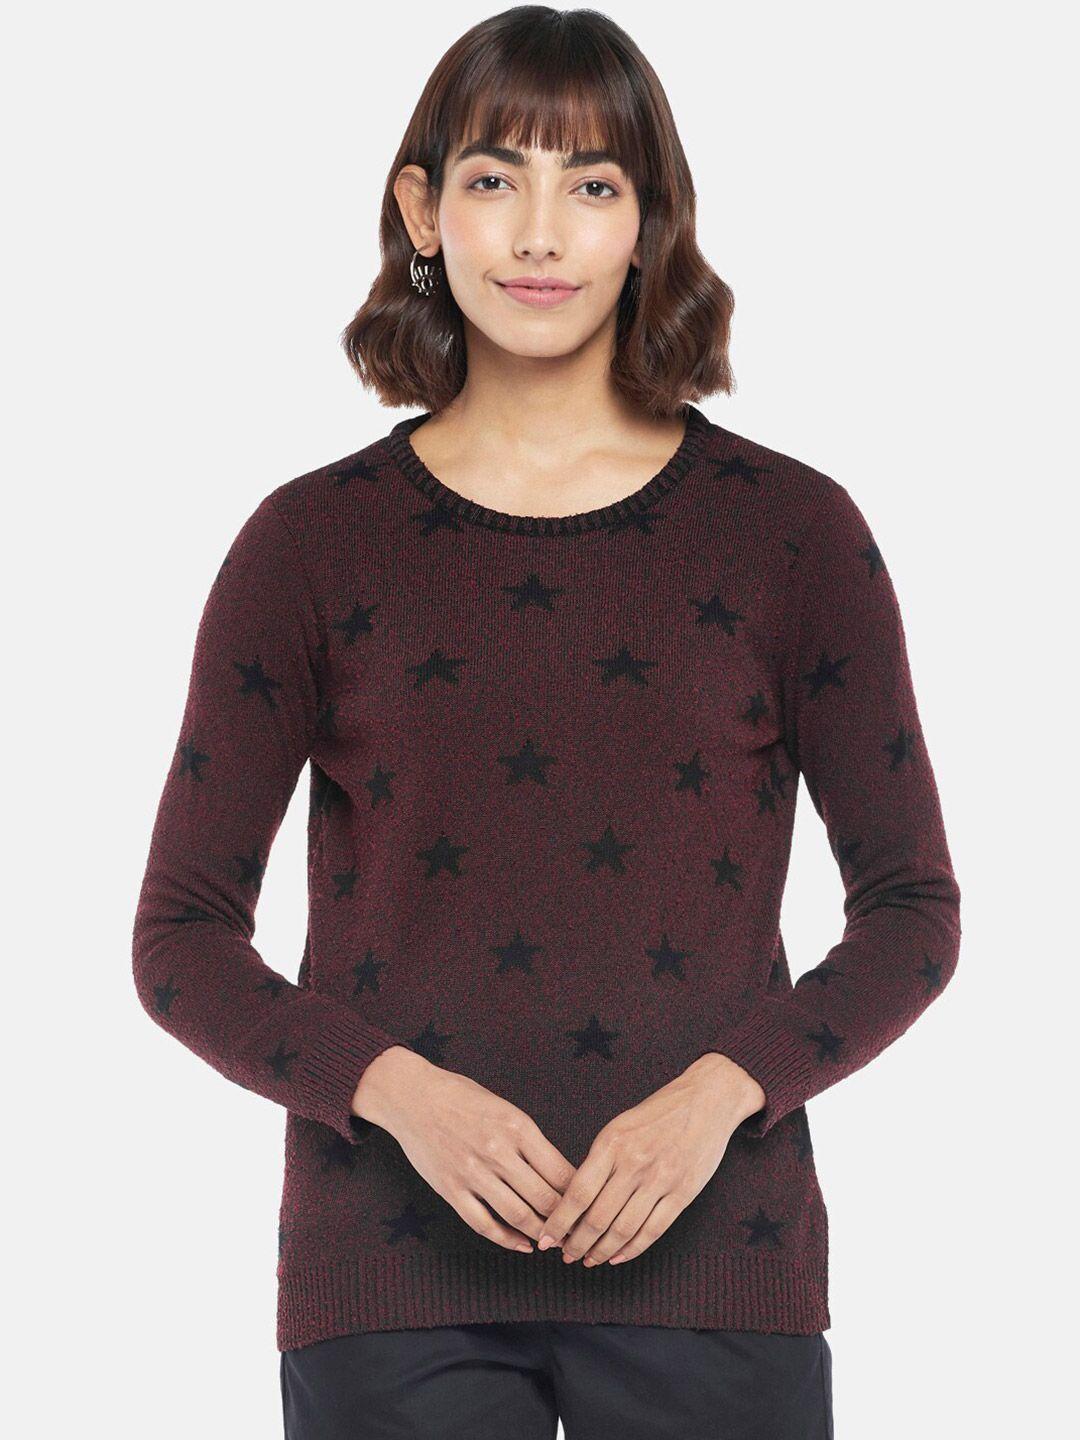 honey by pantaloons women brown & black printed pullover with fuzzy detail